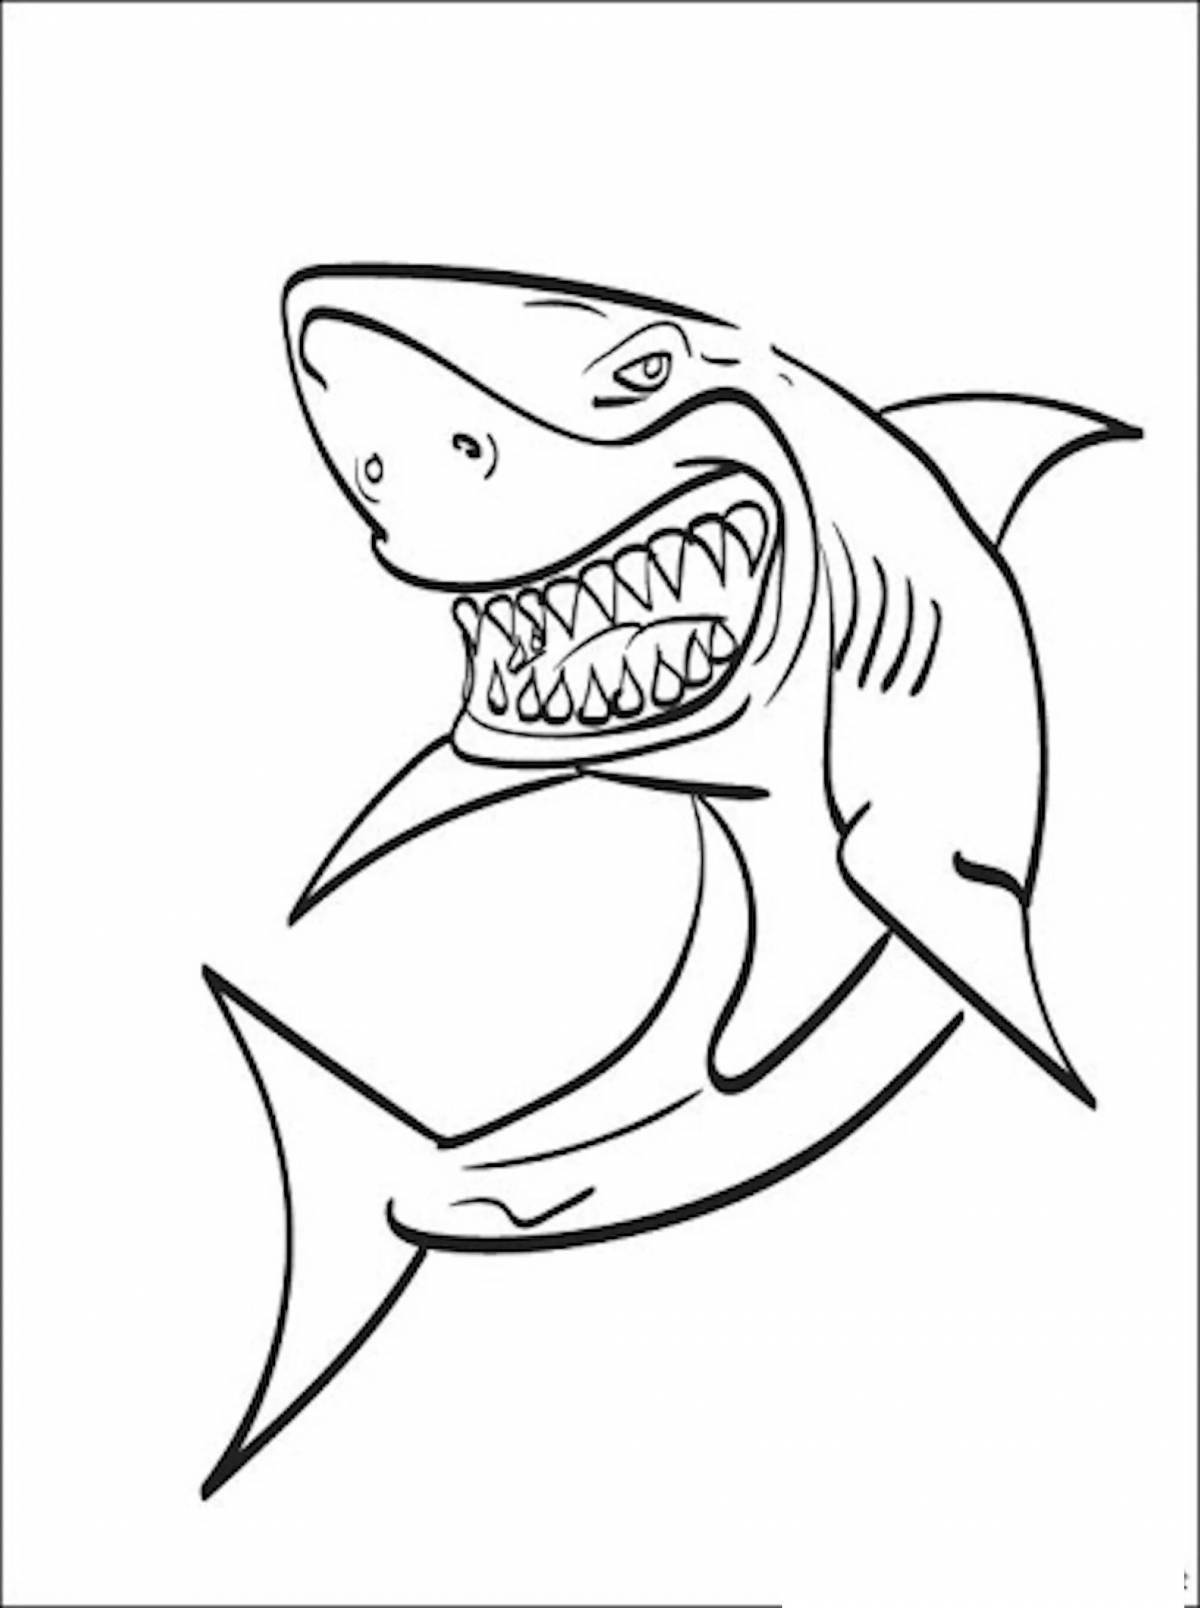 Megalodon creative coloring book for kids